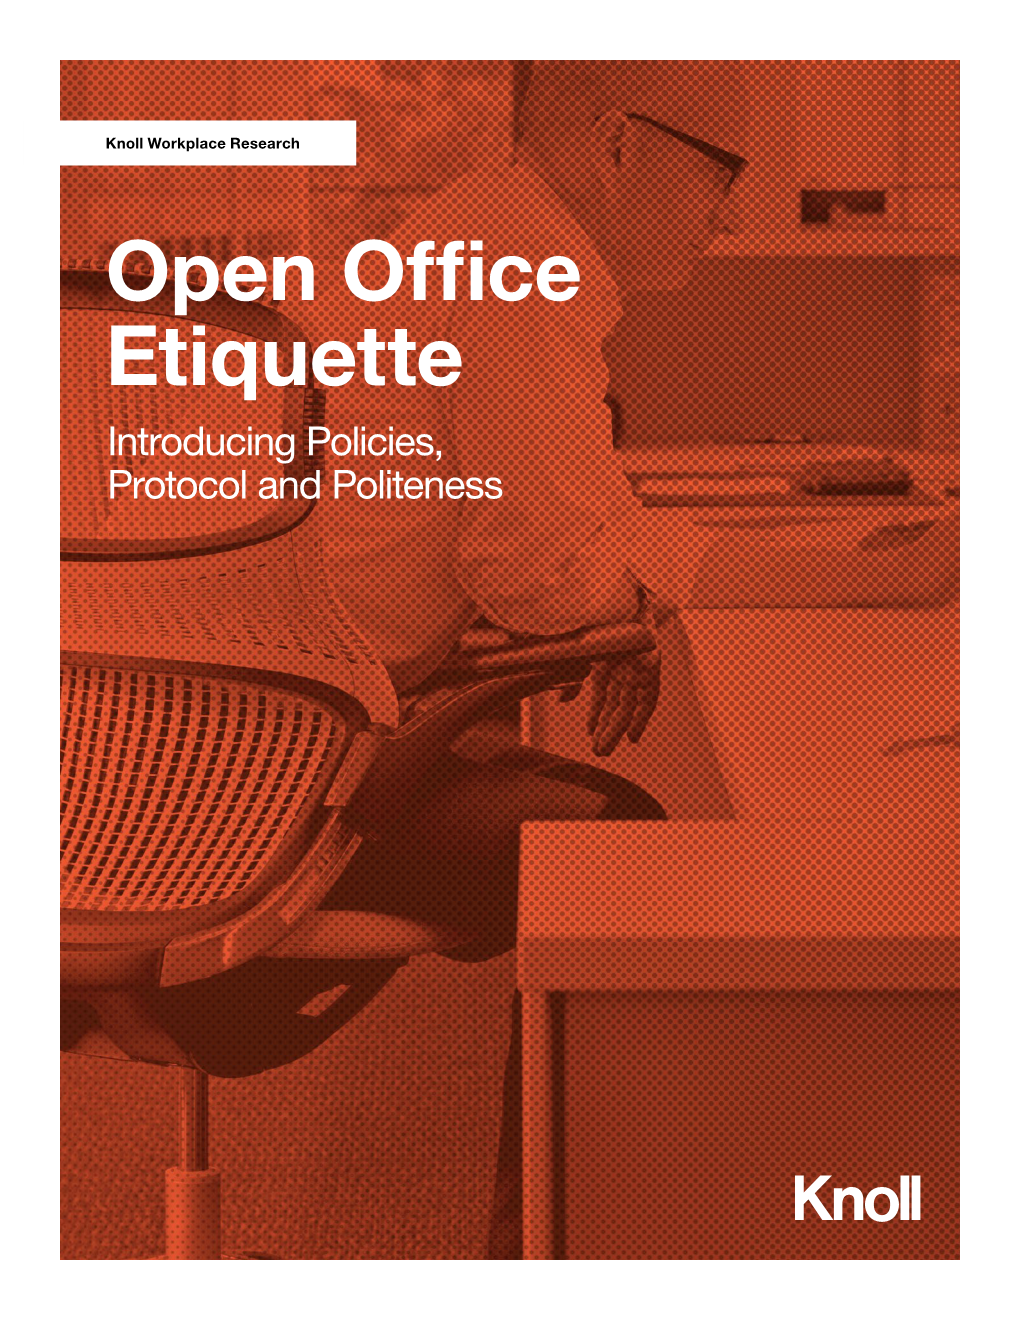 Open Office Etiquette Introducing Policies, Protocol and Politeness Knoll Workplace Research Open Office Etiquette Introducing Policies, Protocol and Politeness